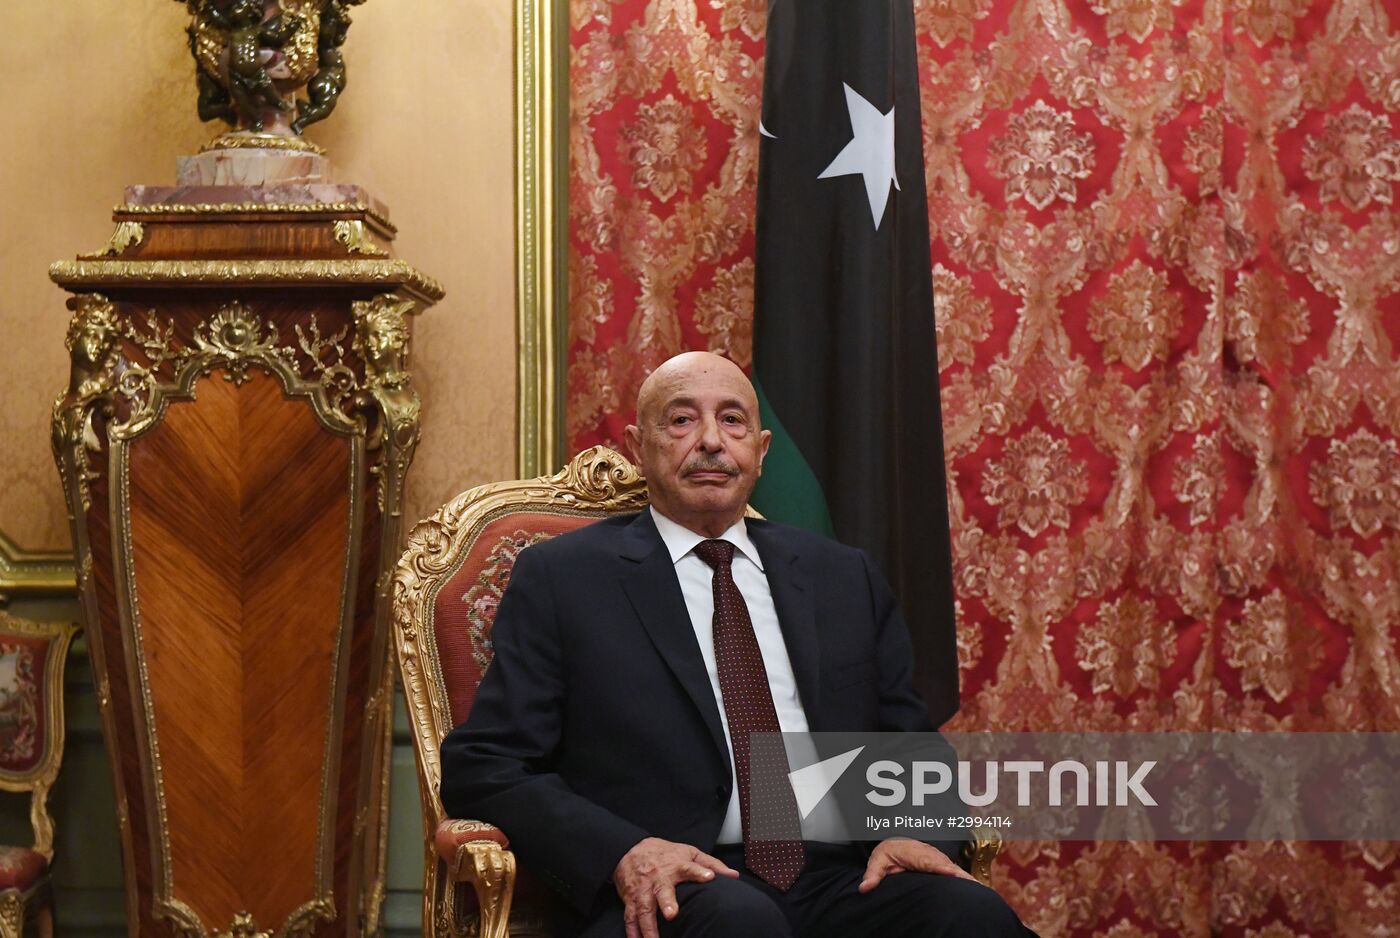 Russian Foreign Minister Sergei Lavrov's meeting with President of House of Representatives of Libya Aguila Saleh